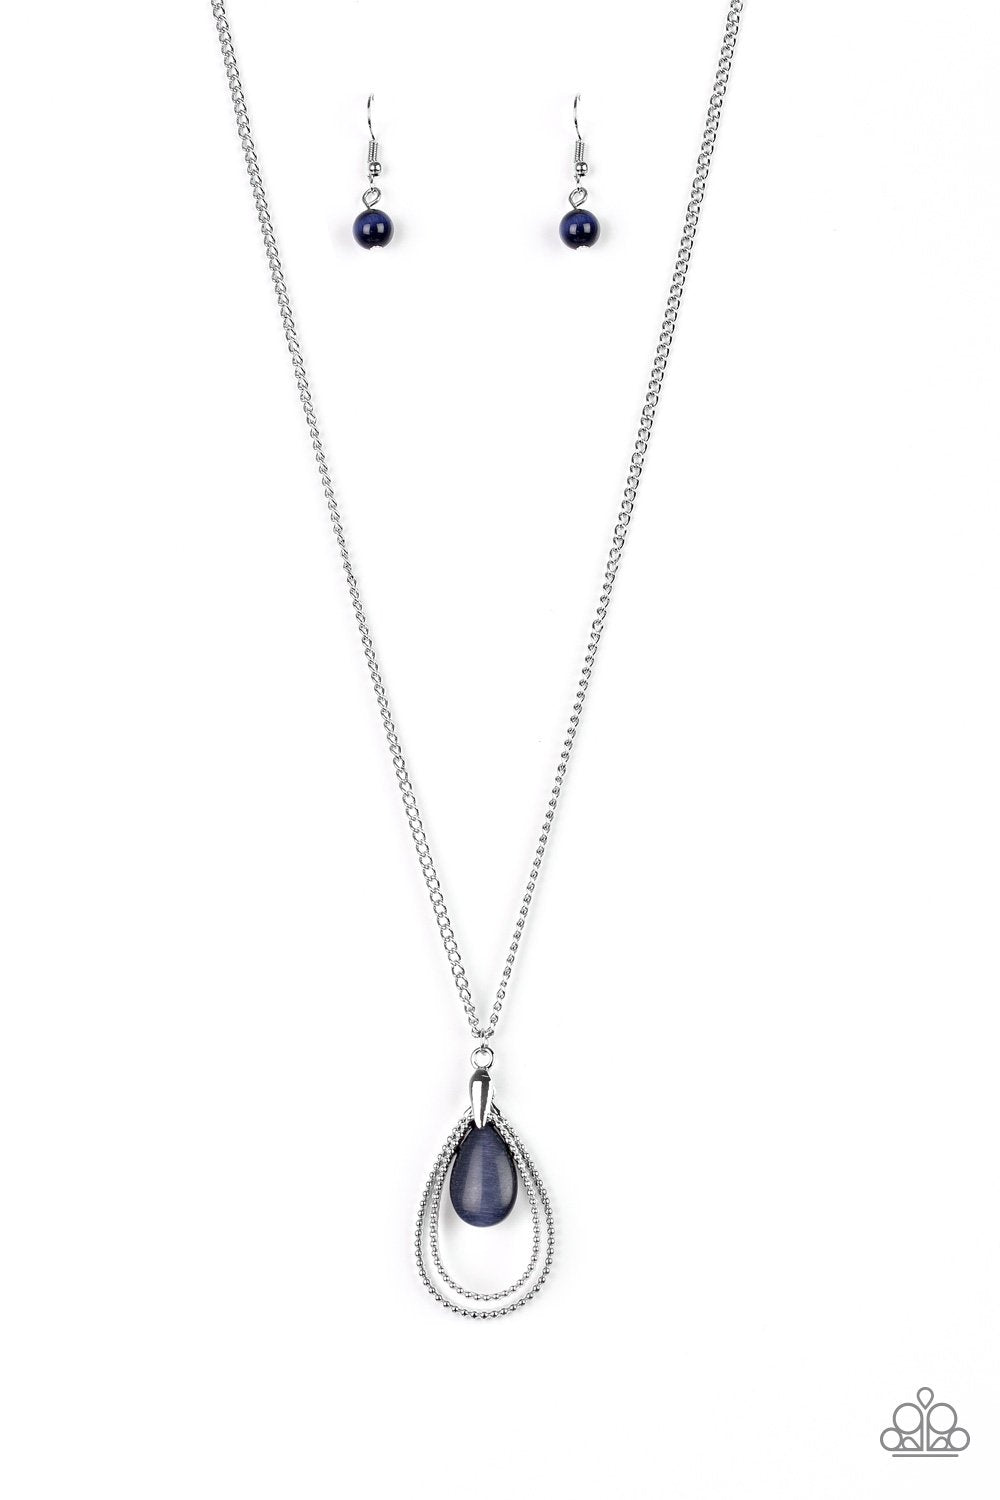 Teardrop Tranquility Blue Moonstone Pendant Necklace - Paparazzi Accessories- lightbox - CarasShop.com - $5 Jewelry by Cara Jewels